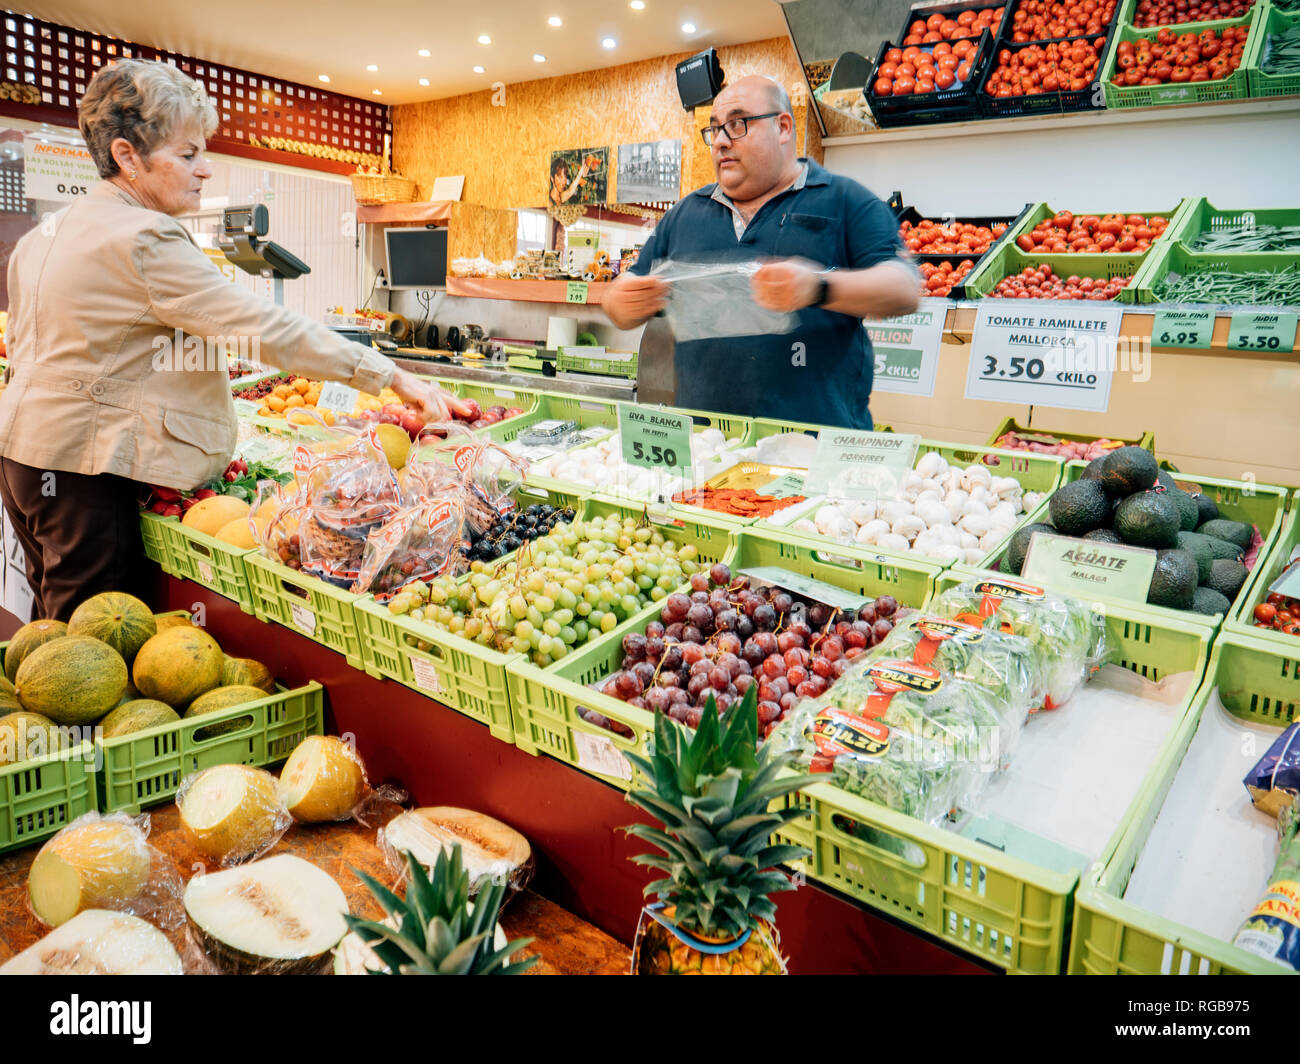 FELANITX, PALMA DE MAJORCA, SPAIN - MAY 10, 2018: Spanish senior woman buying fruits and vegetables on the local farmers market in central square Stock Photo